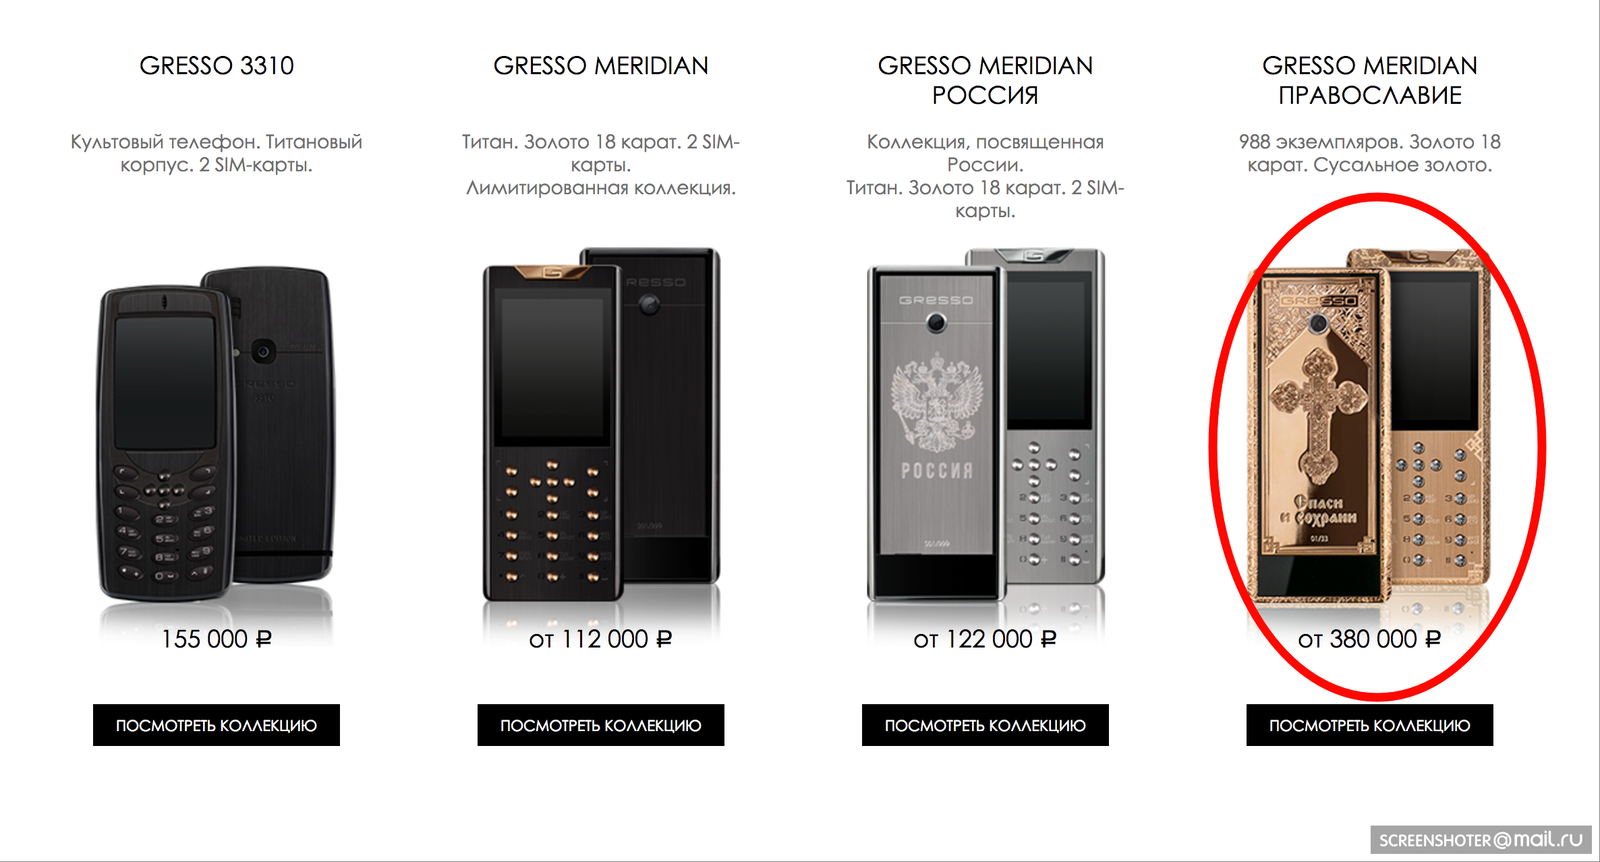 cool phone - Gresso, Show off, Mobile phones, Expensive